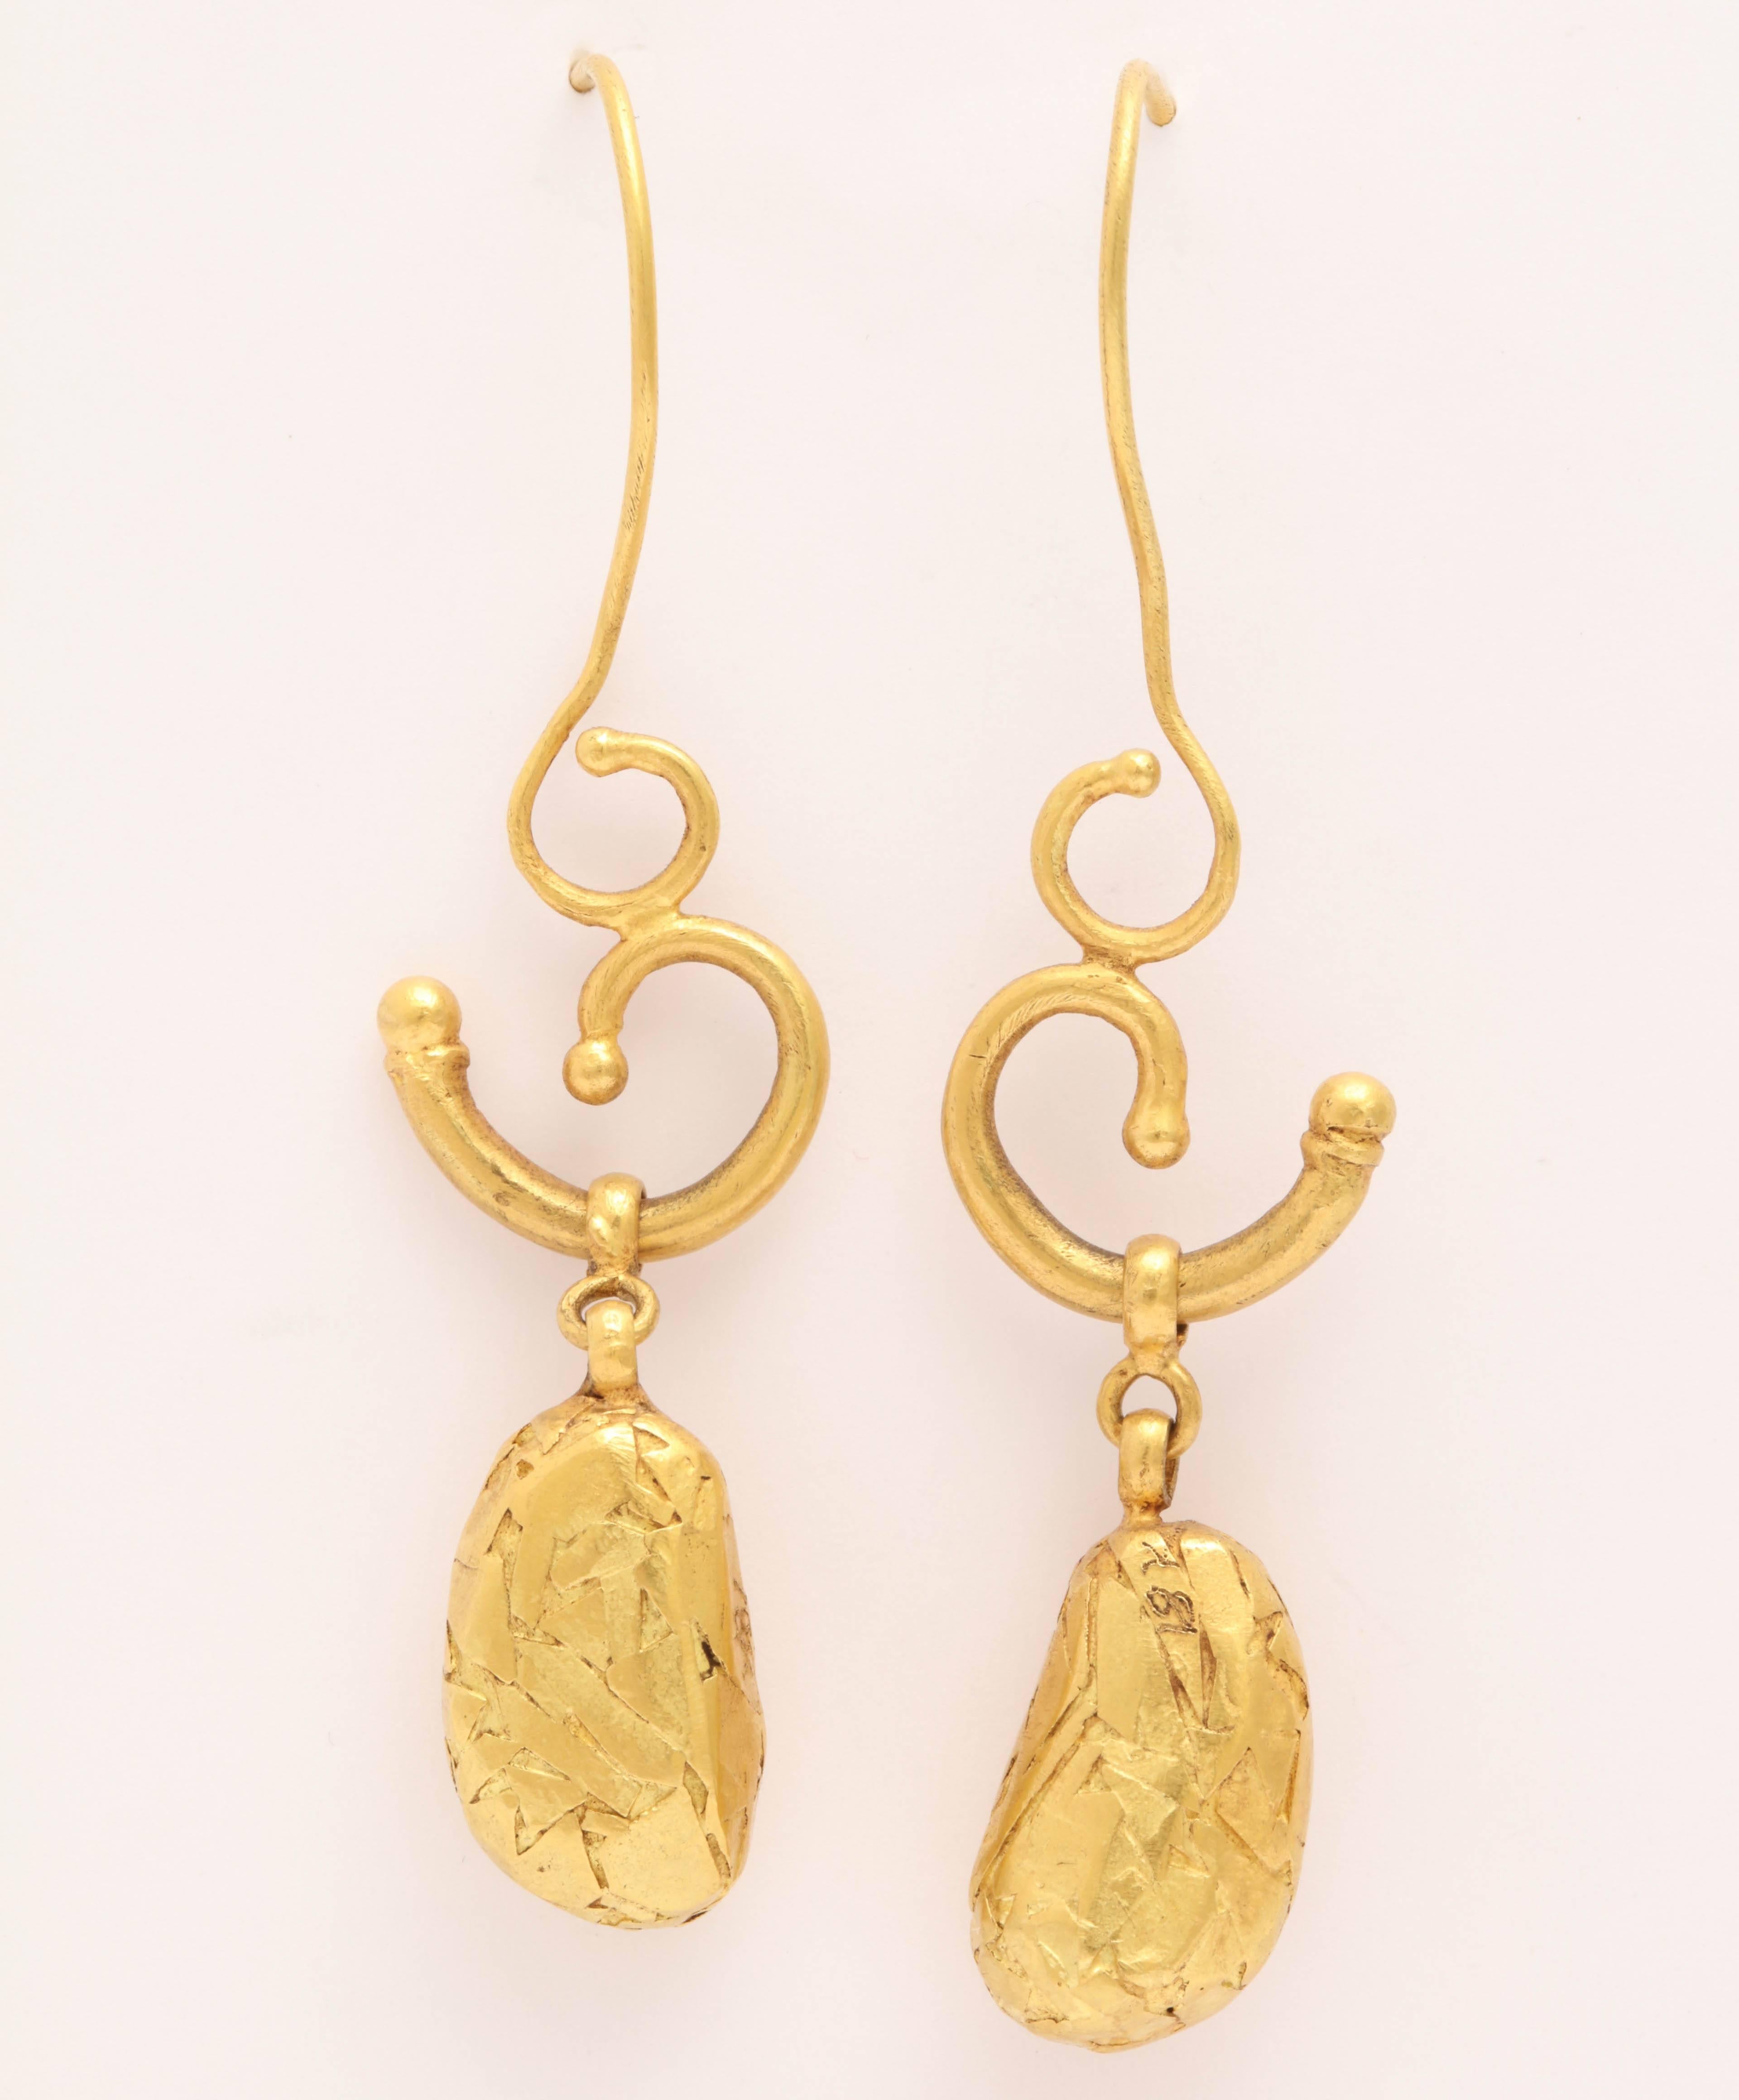 A pair of 18kt yellow gold pebble earrings. Each ear wire is attached to a cornucopia which suspends a gold textured pebble bead.

Length: 2.50 inches
Width: .60 inch